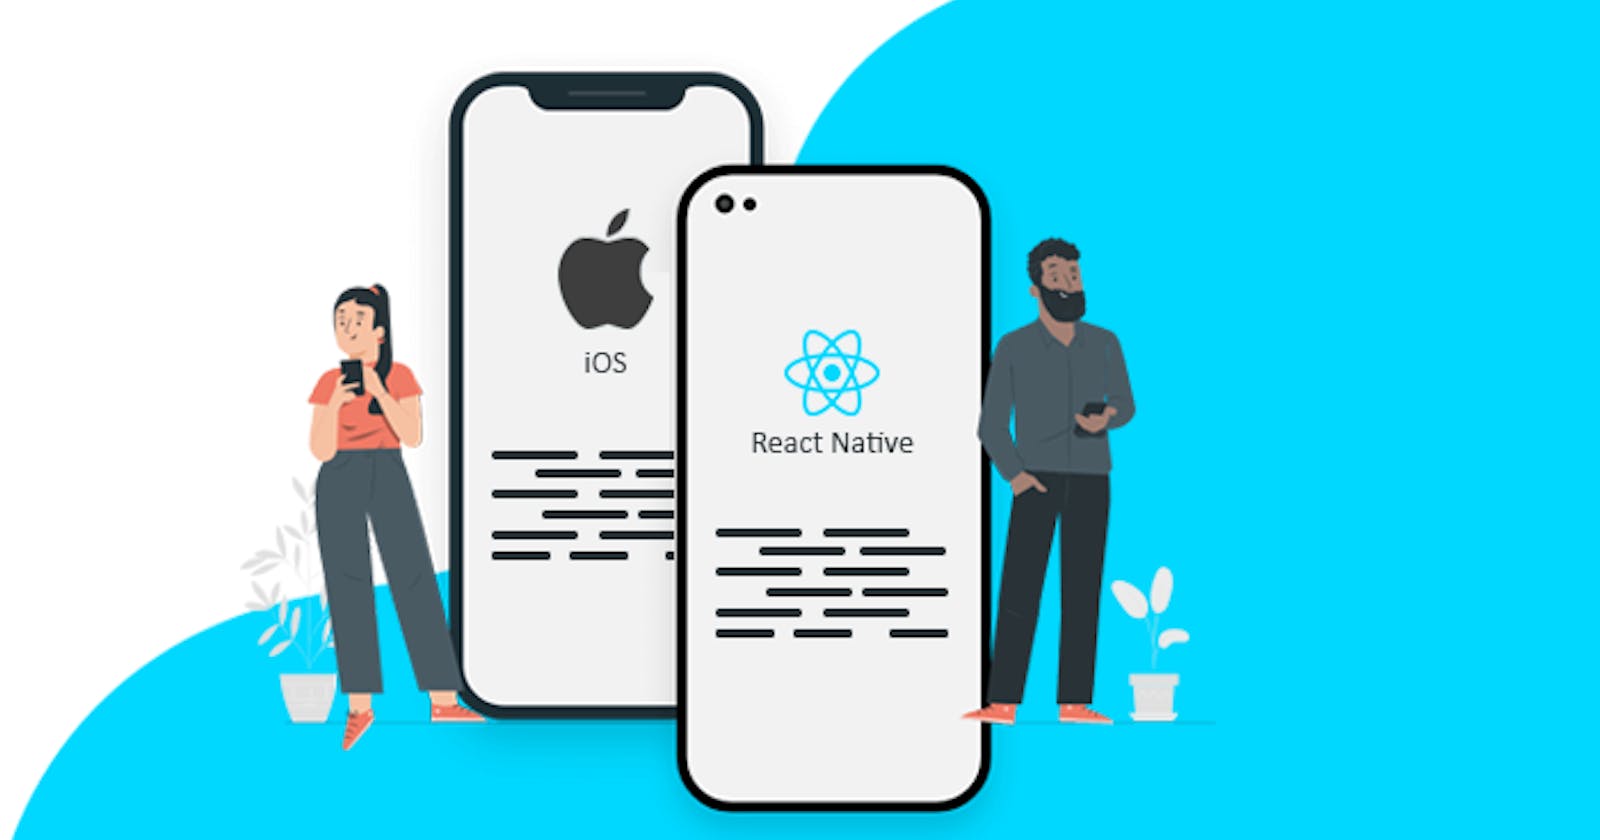 Build iOS Application from a React Native and push to App Store